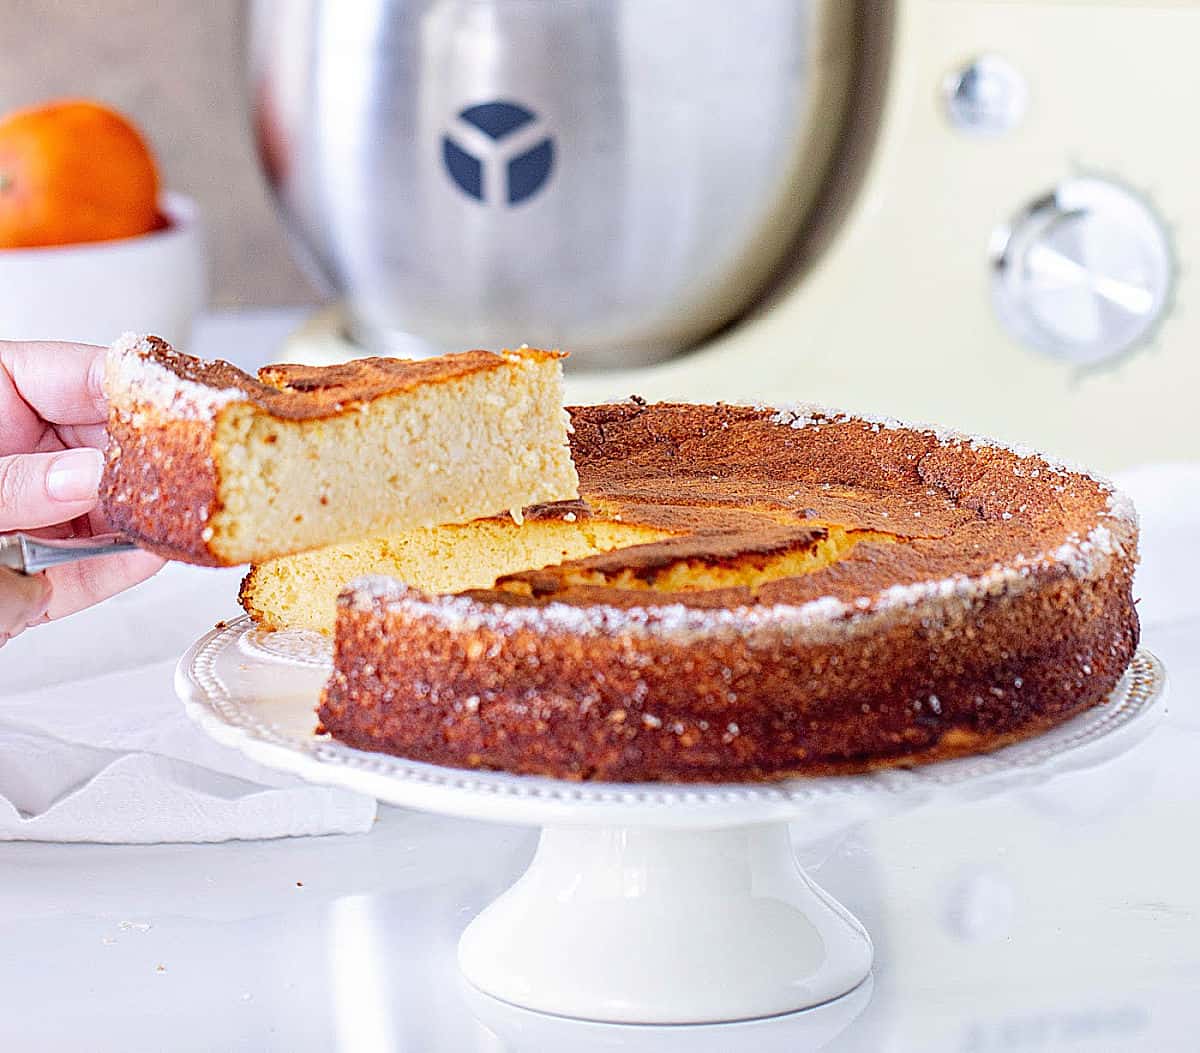 Ricotta Cheesecake on a cake stand, hand holding a slice, white surface, stand mixer in the backgorund.